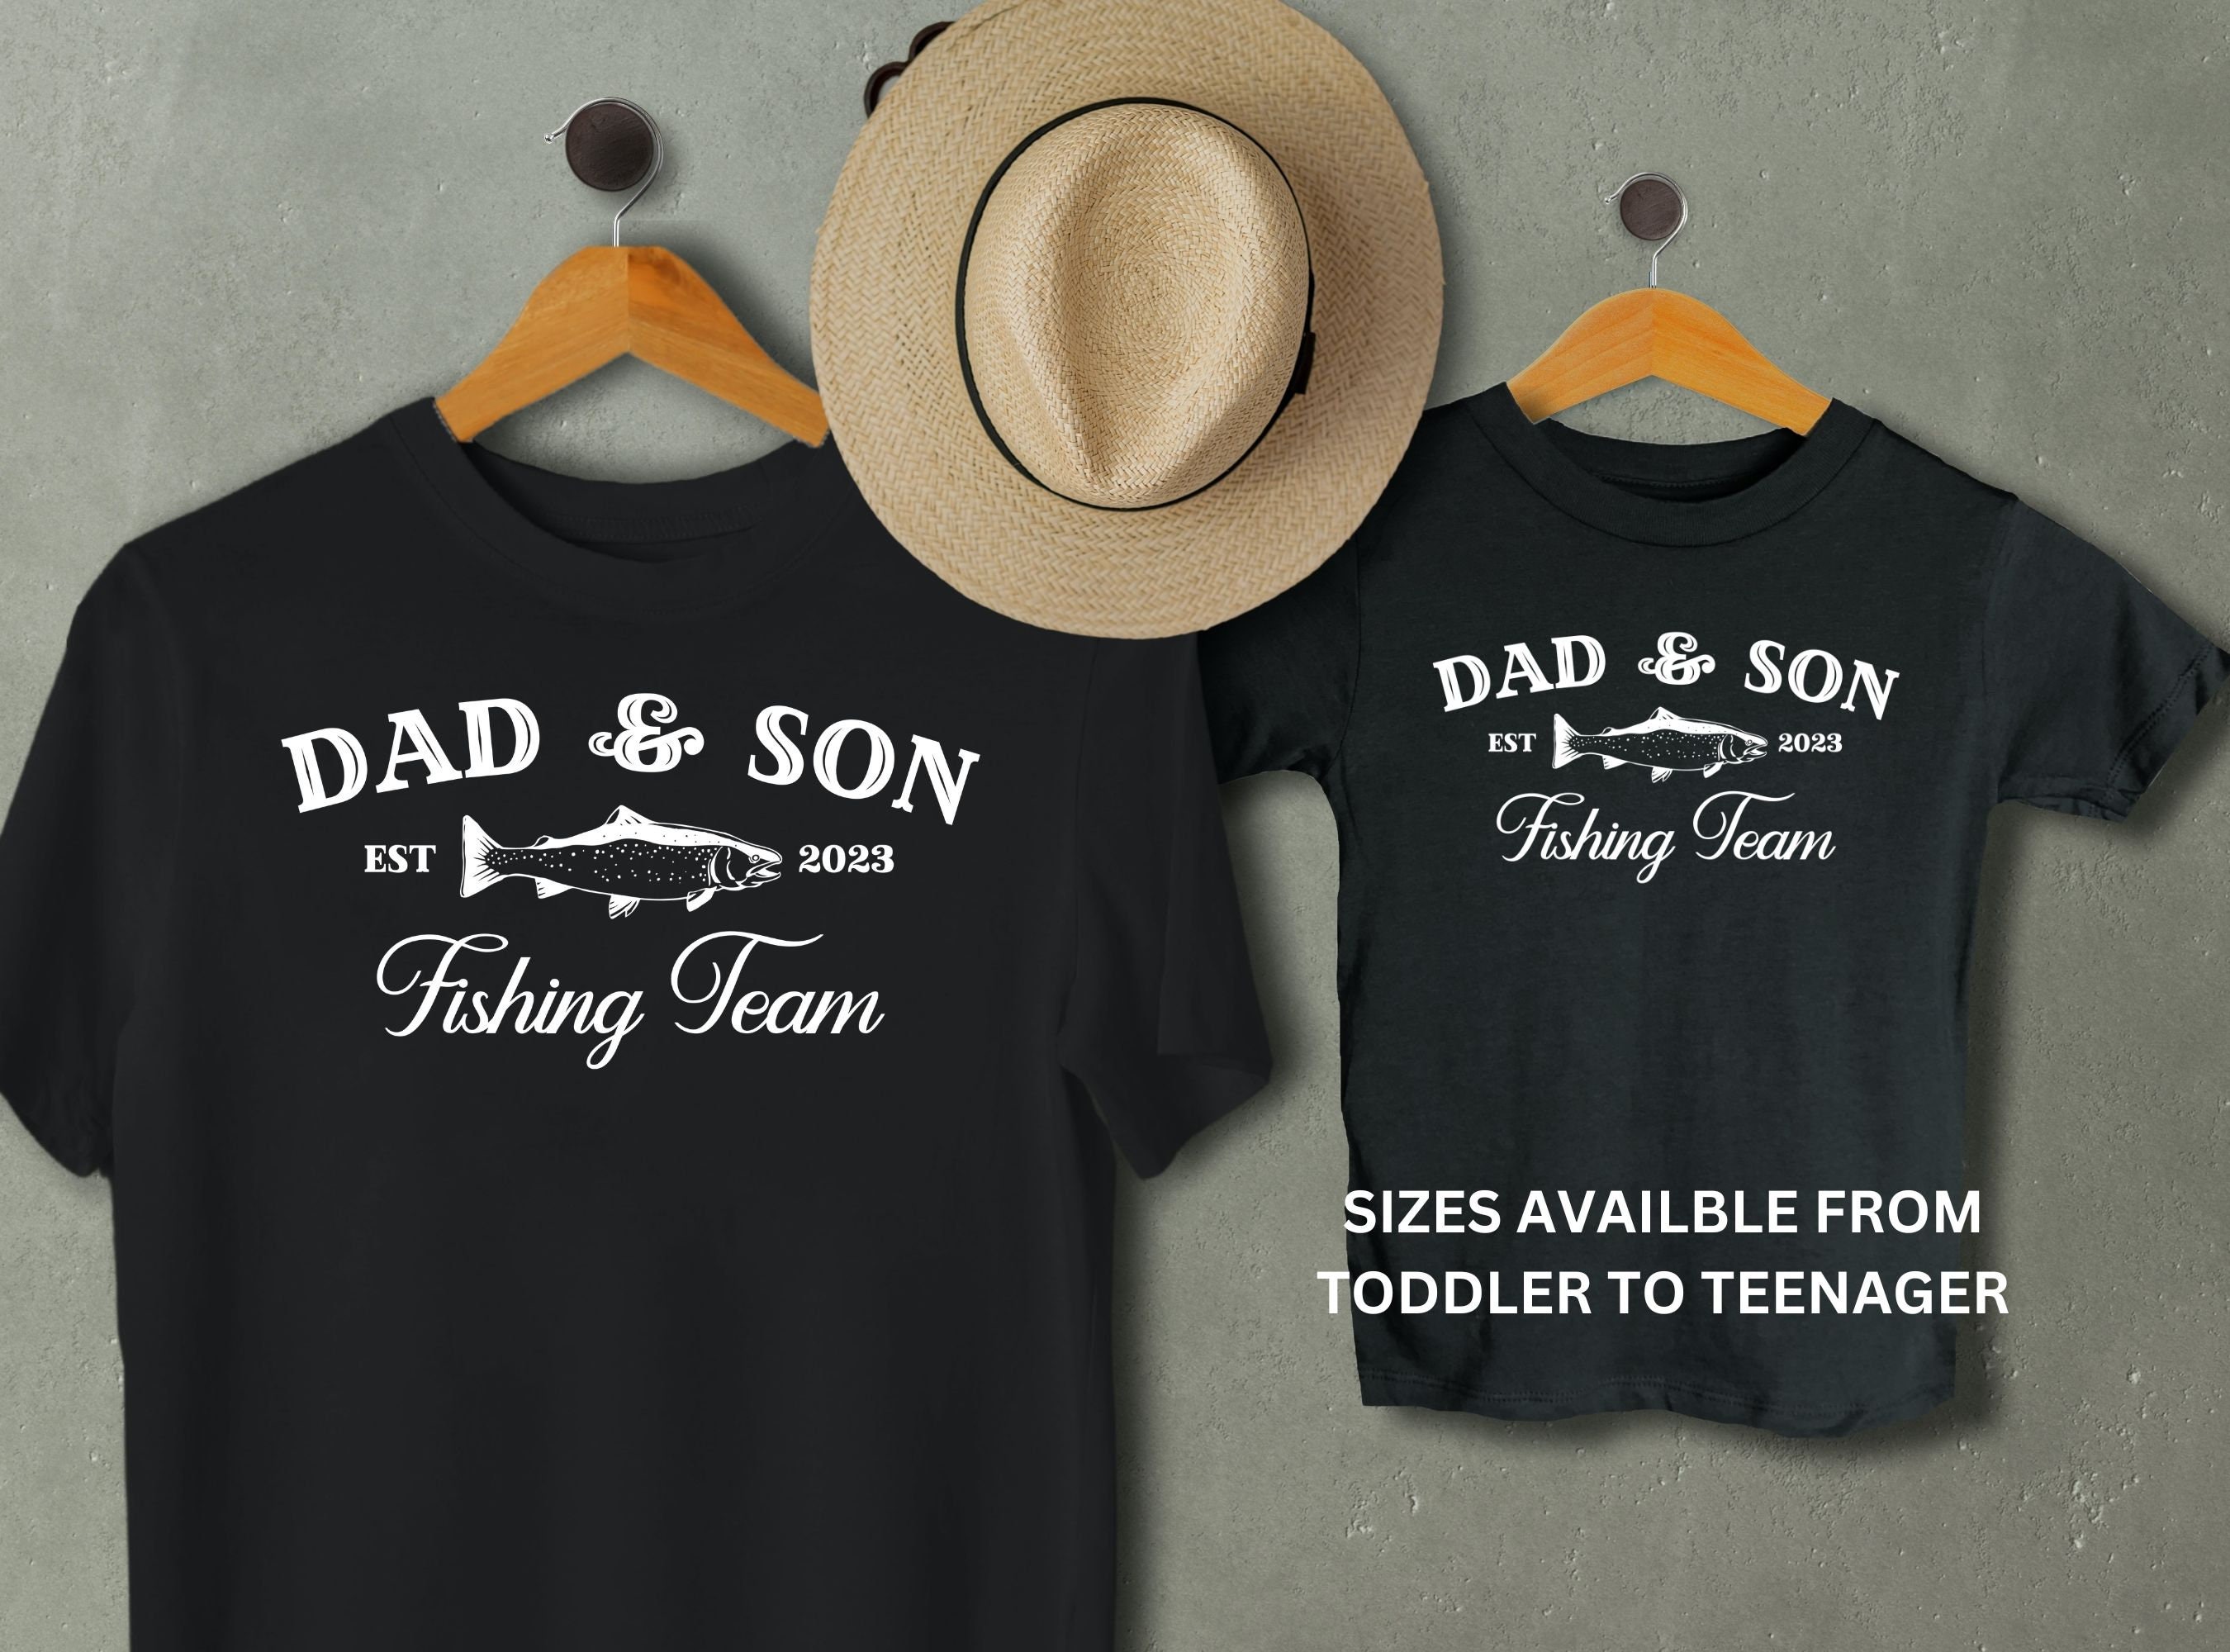 Dad and Son Fishing Shirts, Matching Father Son Shirts, Daddy and Me Shirts,  Fishing Tshirts Dad Son, Fishing Team T-shirts, Family Shirts, -  Canada